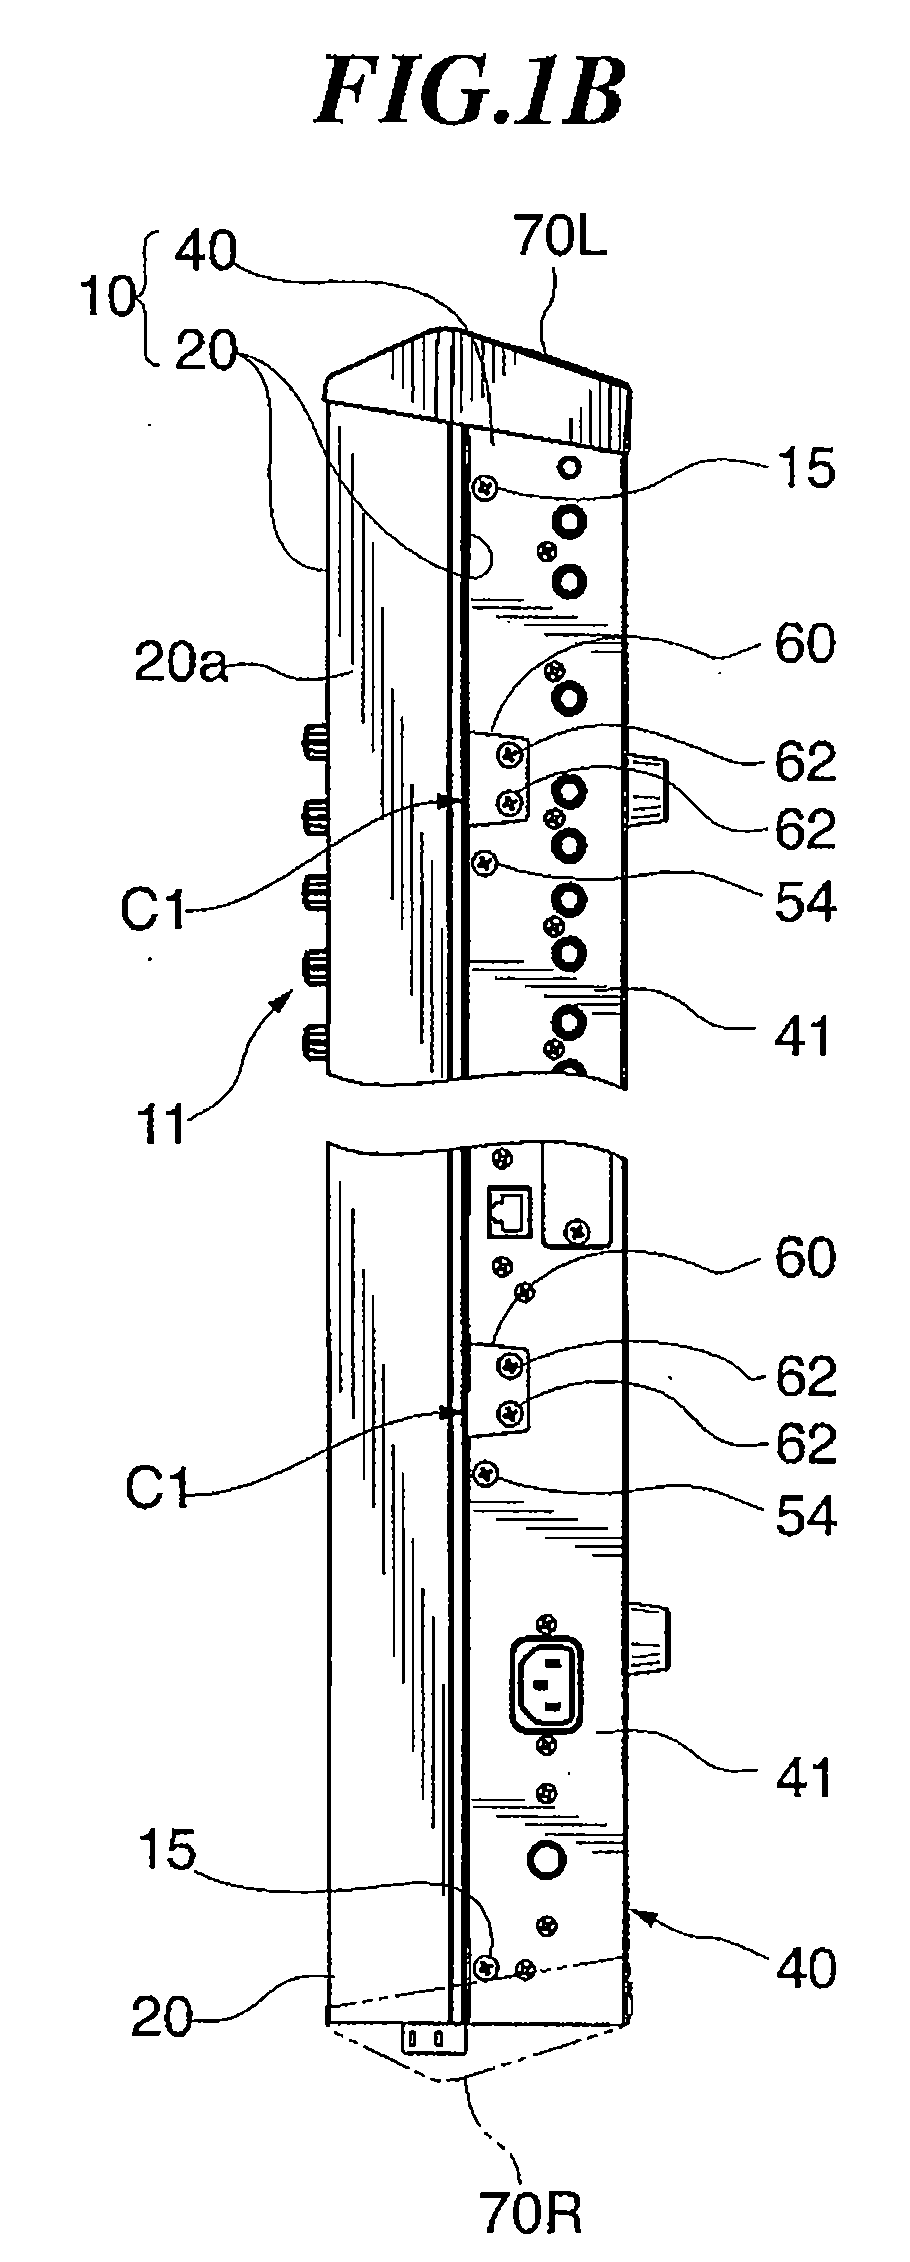 Housing Structure of Electronic Keyboard Musical Instrument